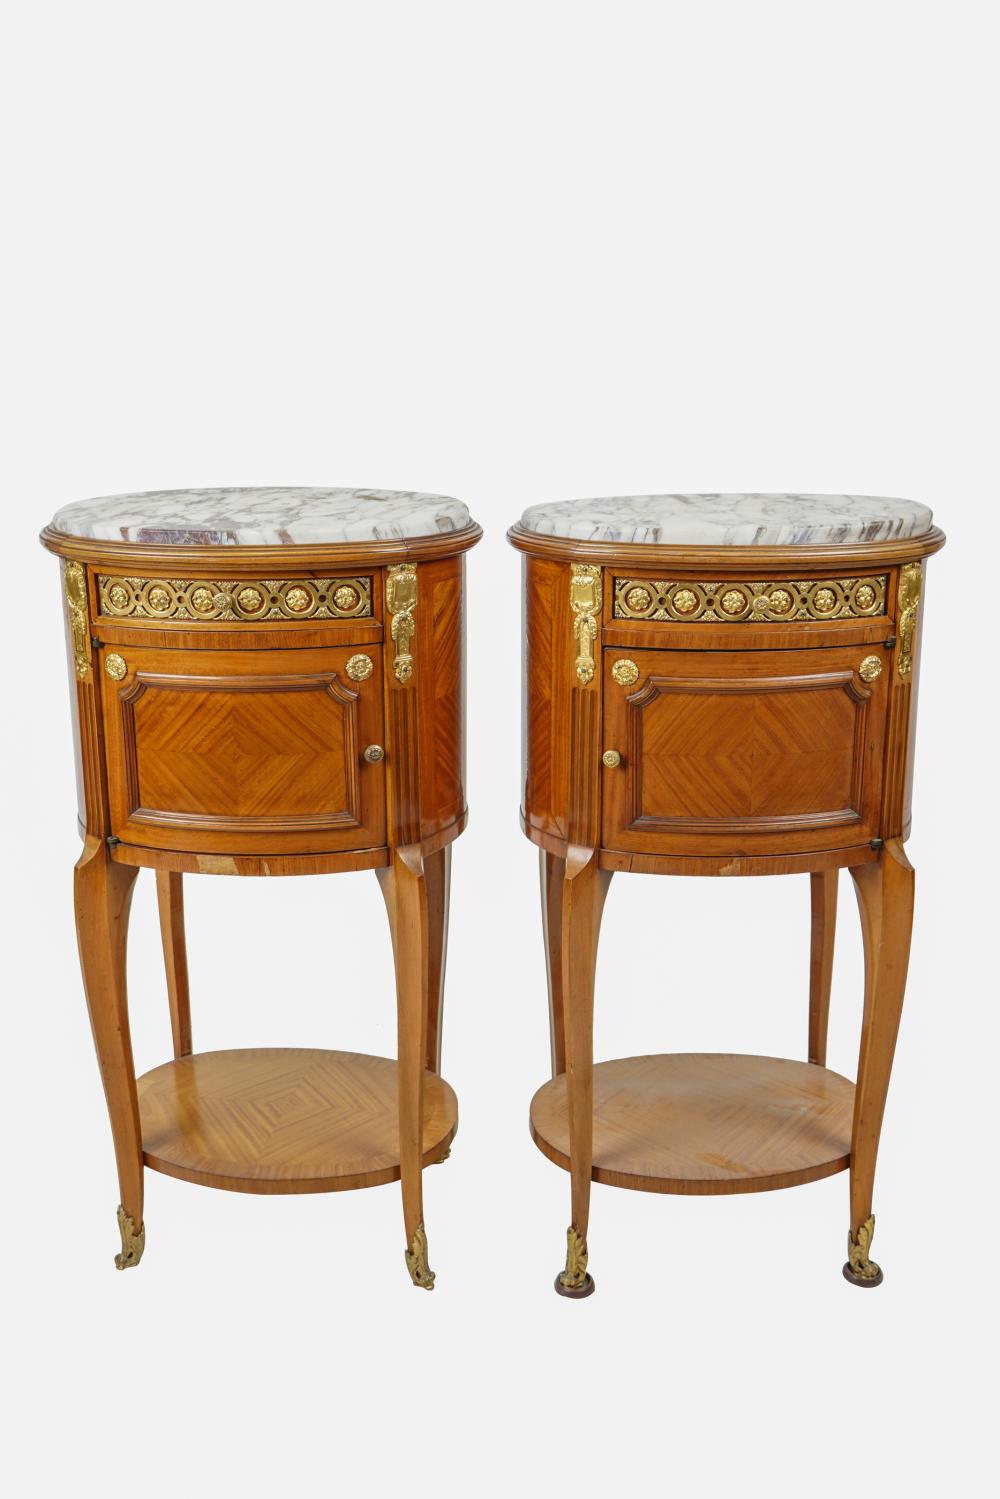 PAIR OF LOUIS XVI STYLE MARBLE INSET 332801